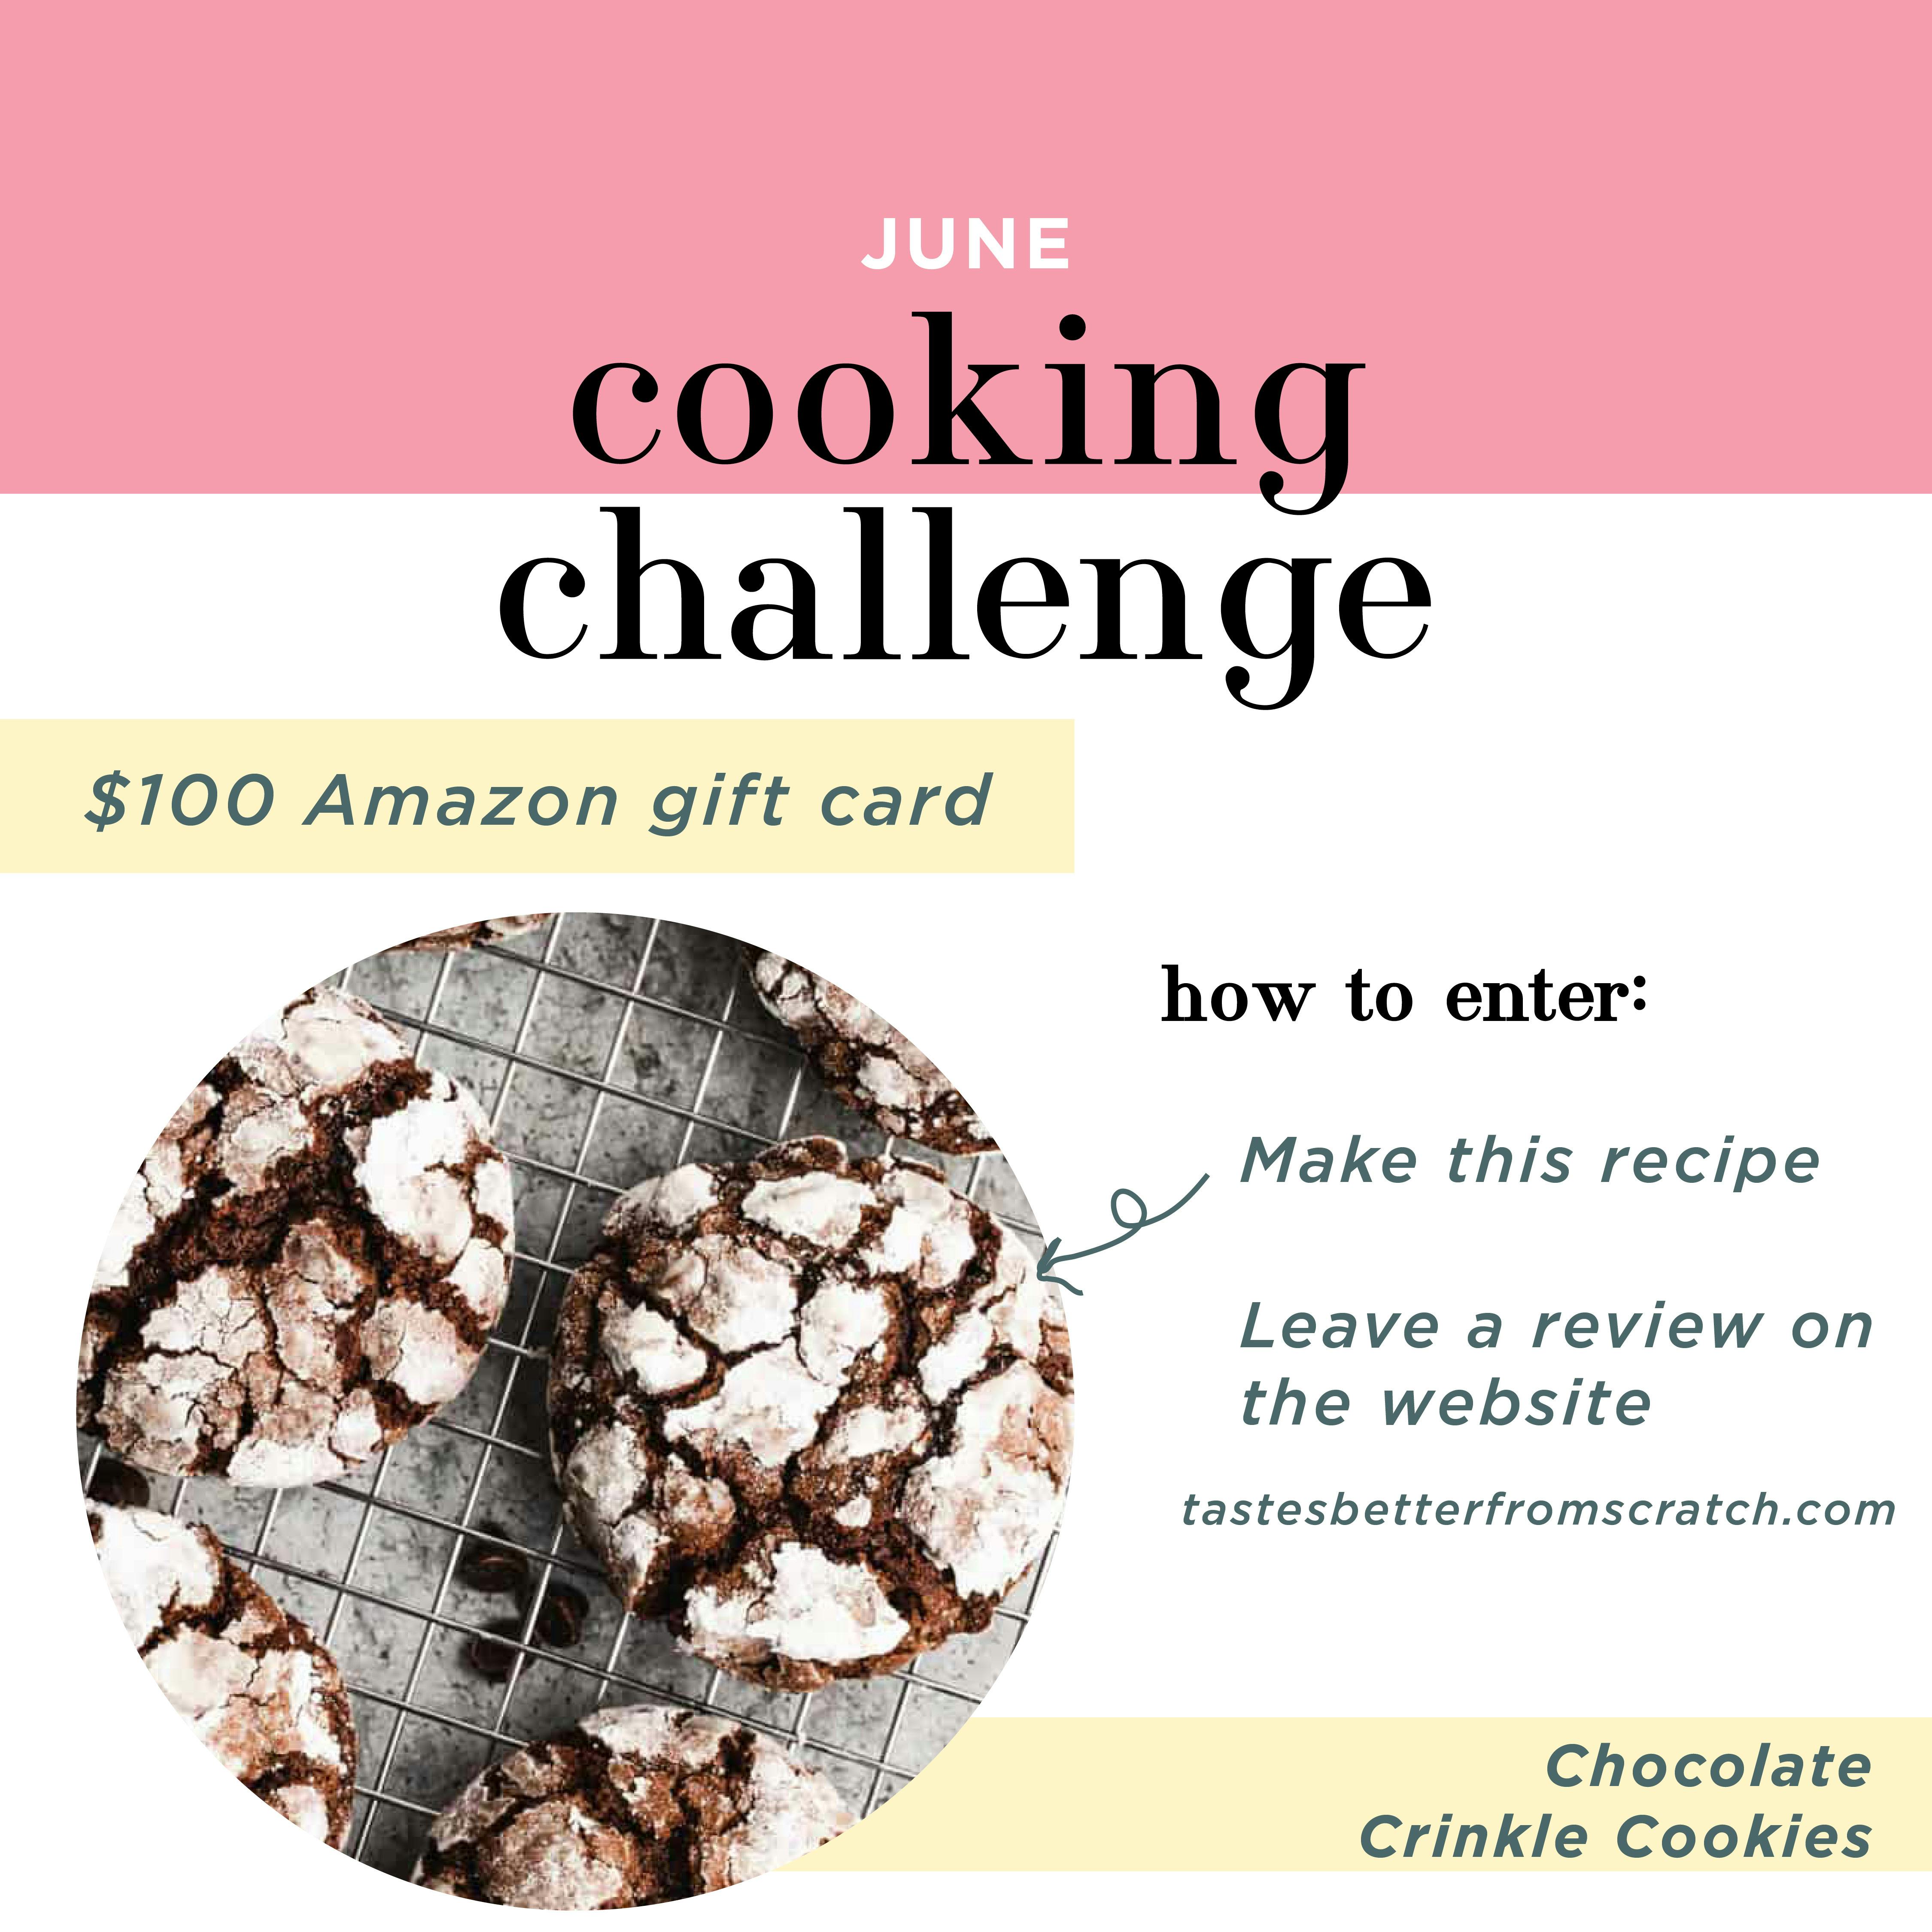 June Cooking Challenge: Chocolate Crinkle Cookies. Win a $100 Amazon Gift Card just leave a comment on the recipe to ente